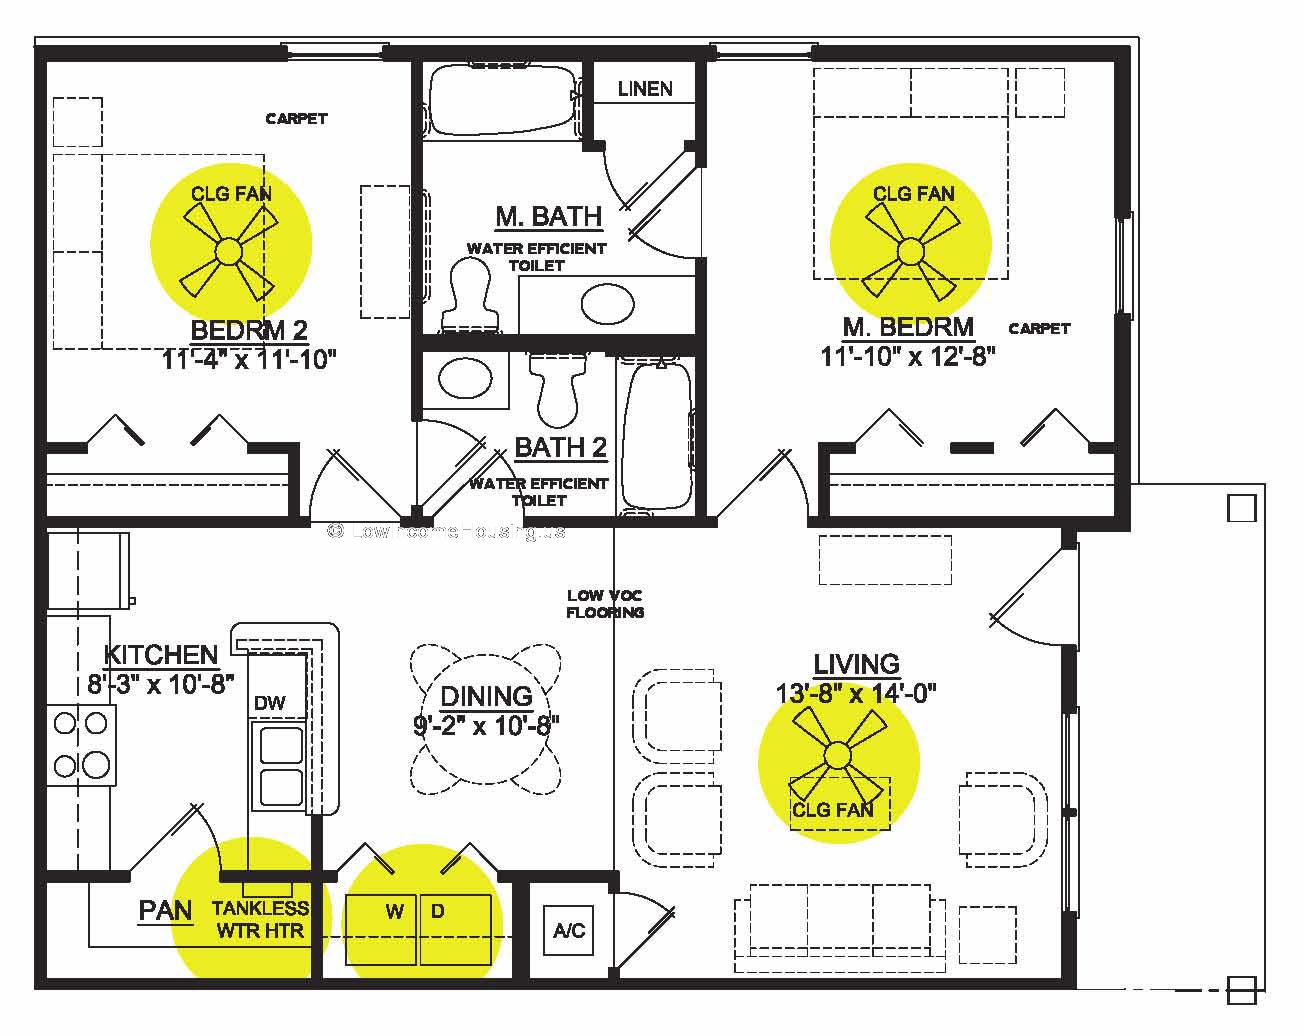 Floor plan showing two bedrooms with private baths and toilets.  Kitchen, Dining and Living Areas. 